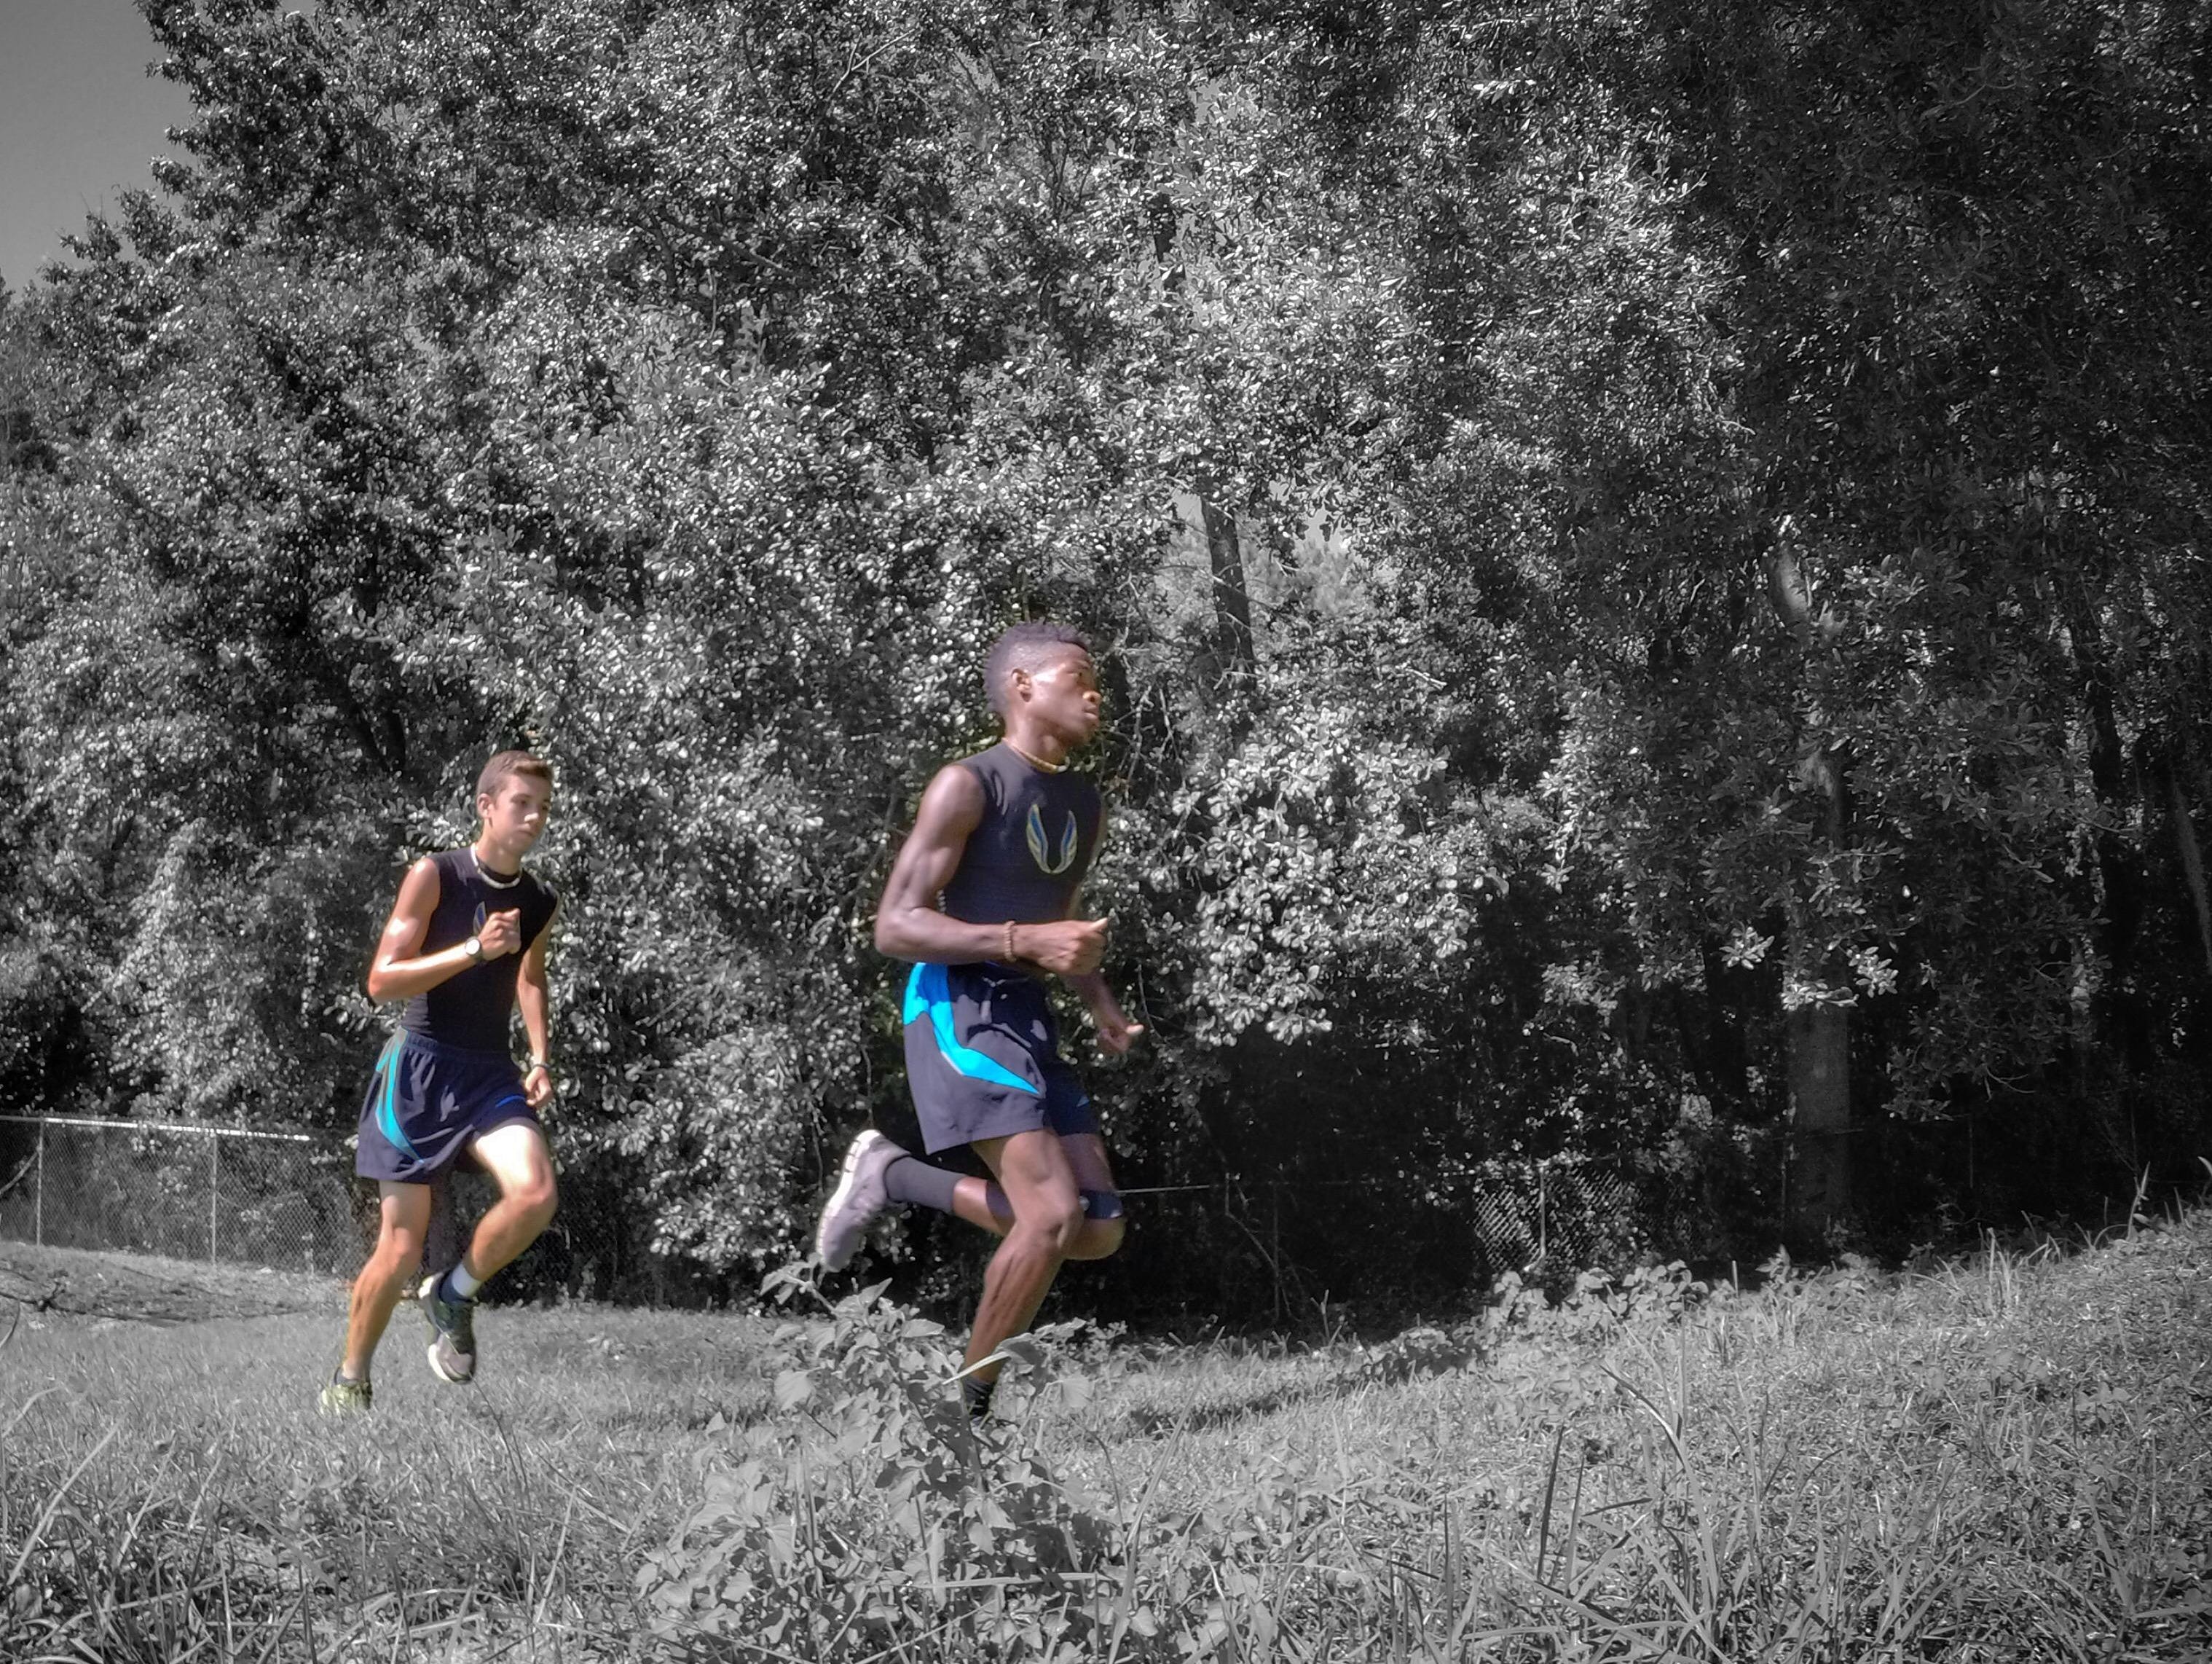 Rickards seniors Evan Garrison and Solomon Stevens go for a 3-mile warm-up run on campus to start Monday’s cross country practice.